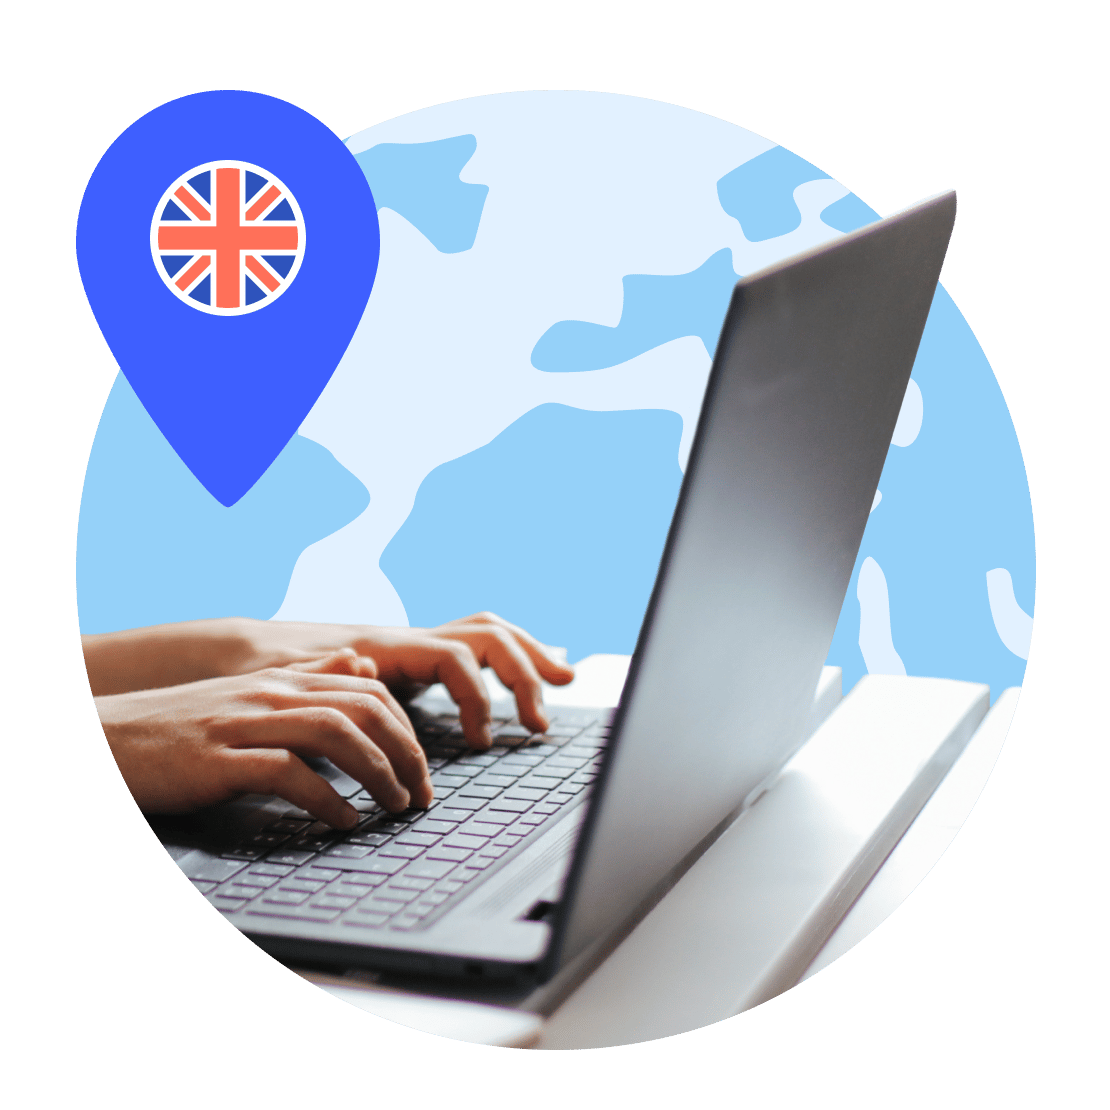 A person is using NordVPN to connect a UK server.